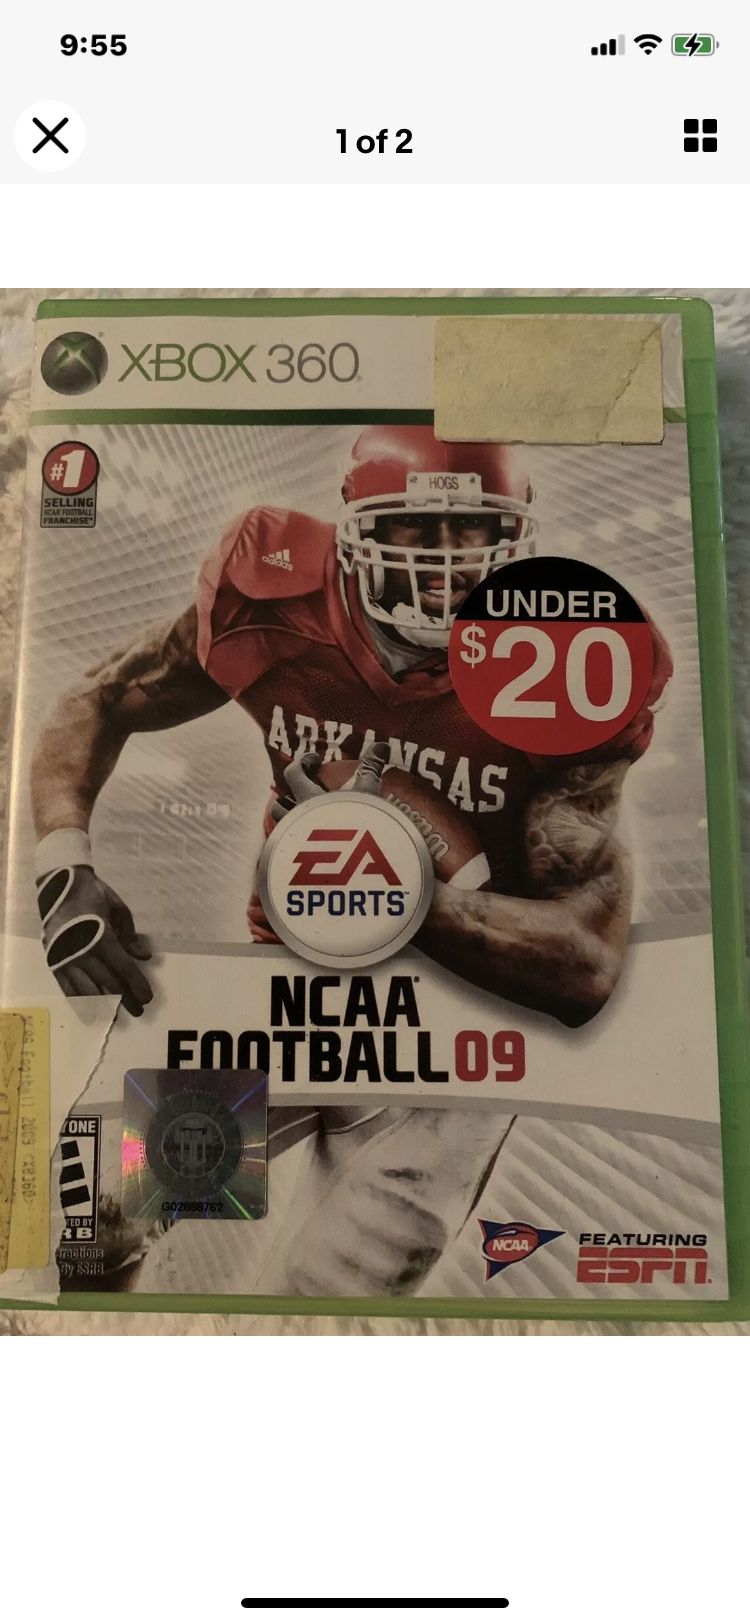  NCAA Football 09 (Microsoft Xbox 360, 2008). Condition is "Very Good". Shipped with USPS First Class.